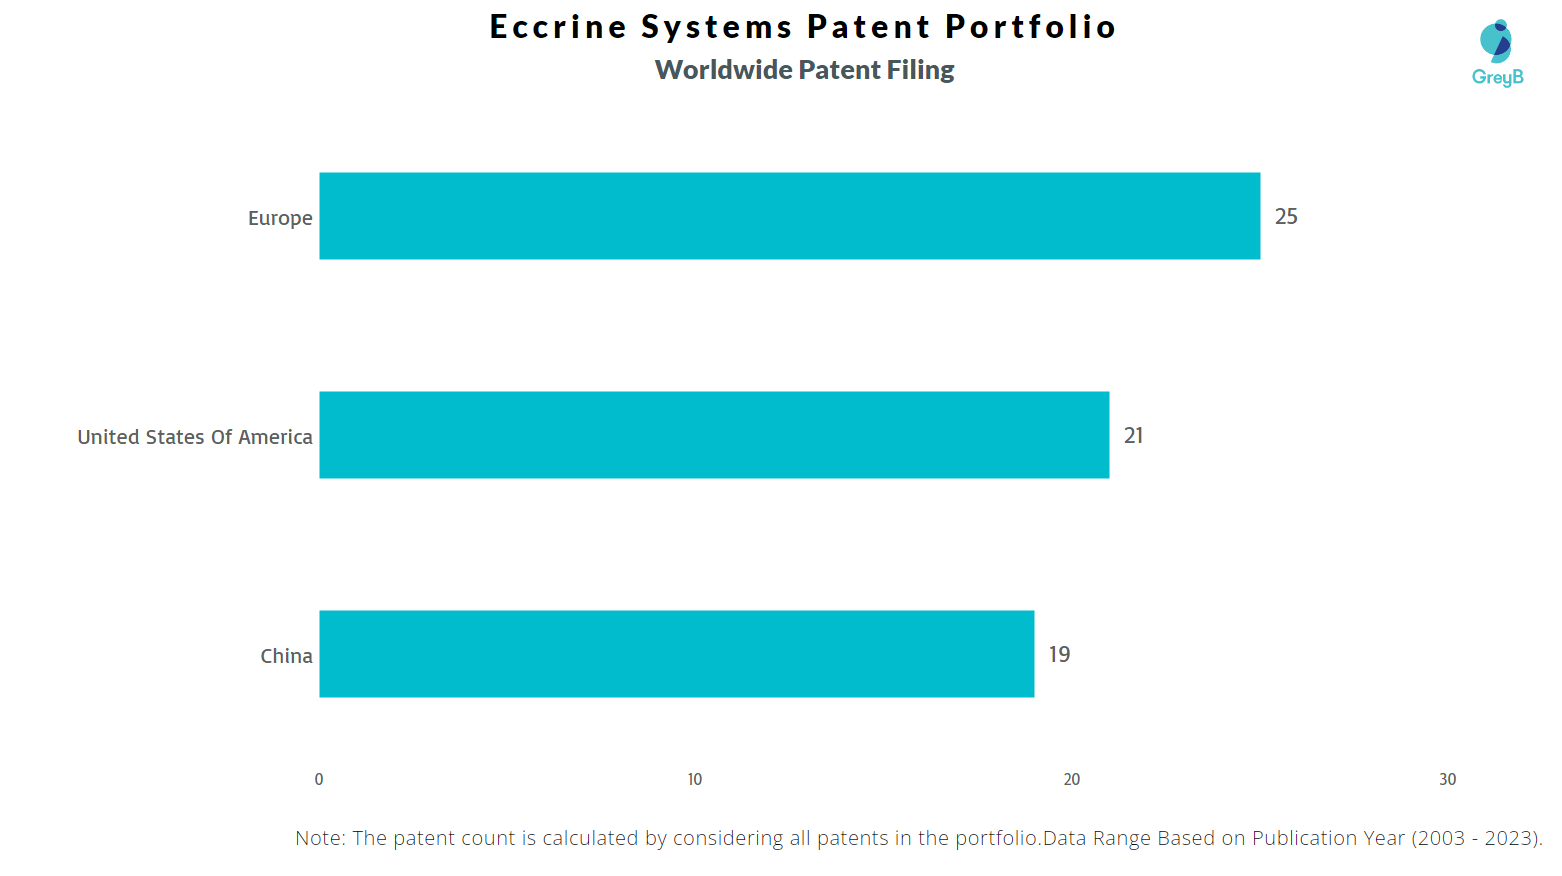 Eccrine Systems Worldwide Patent Filing